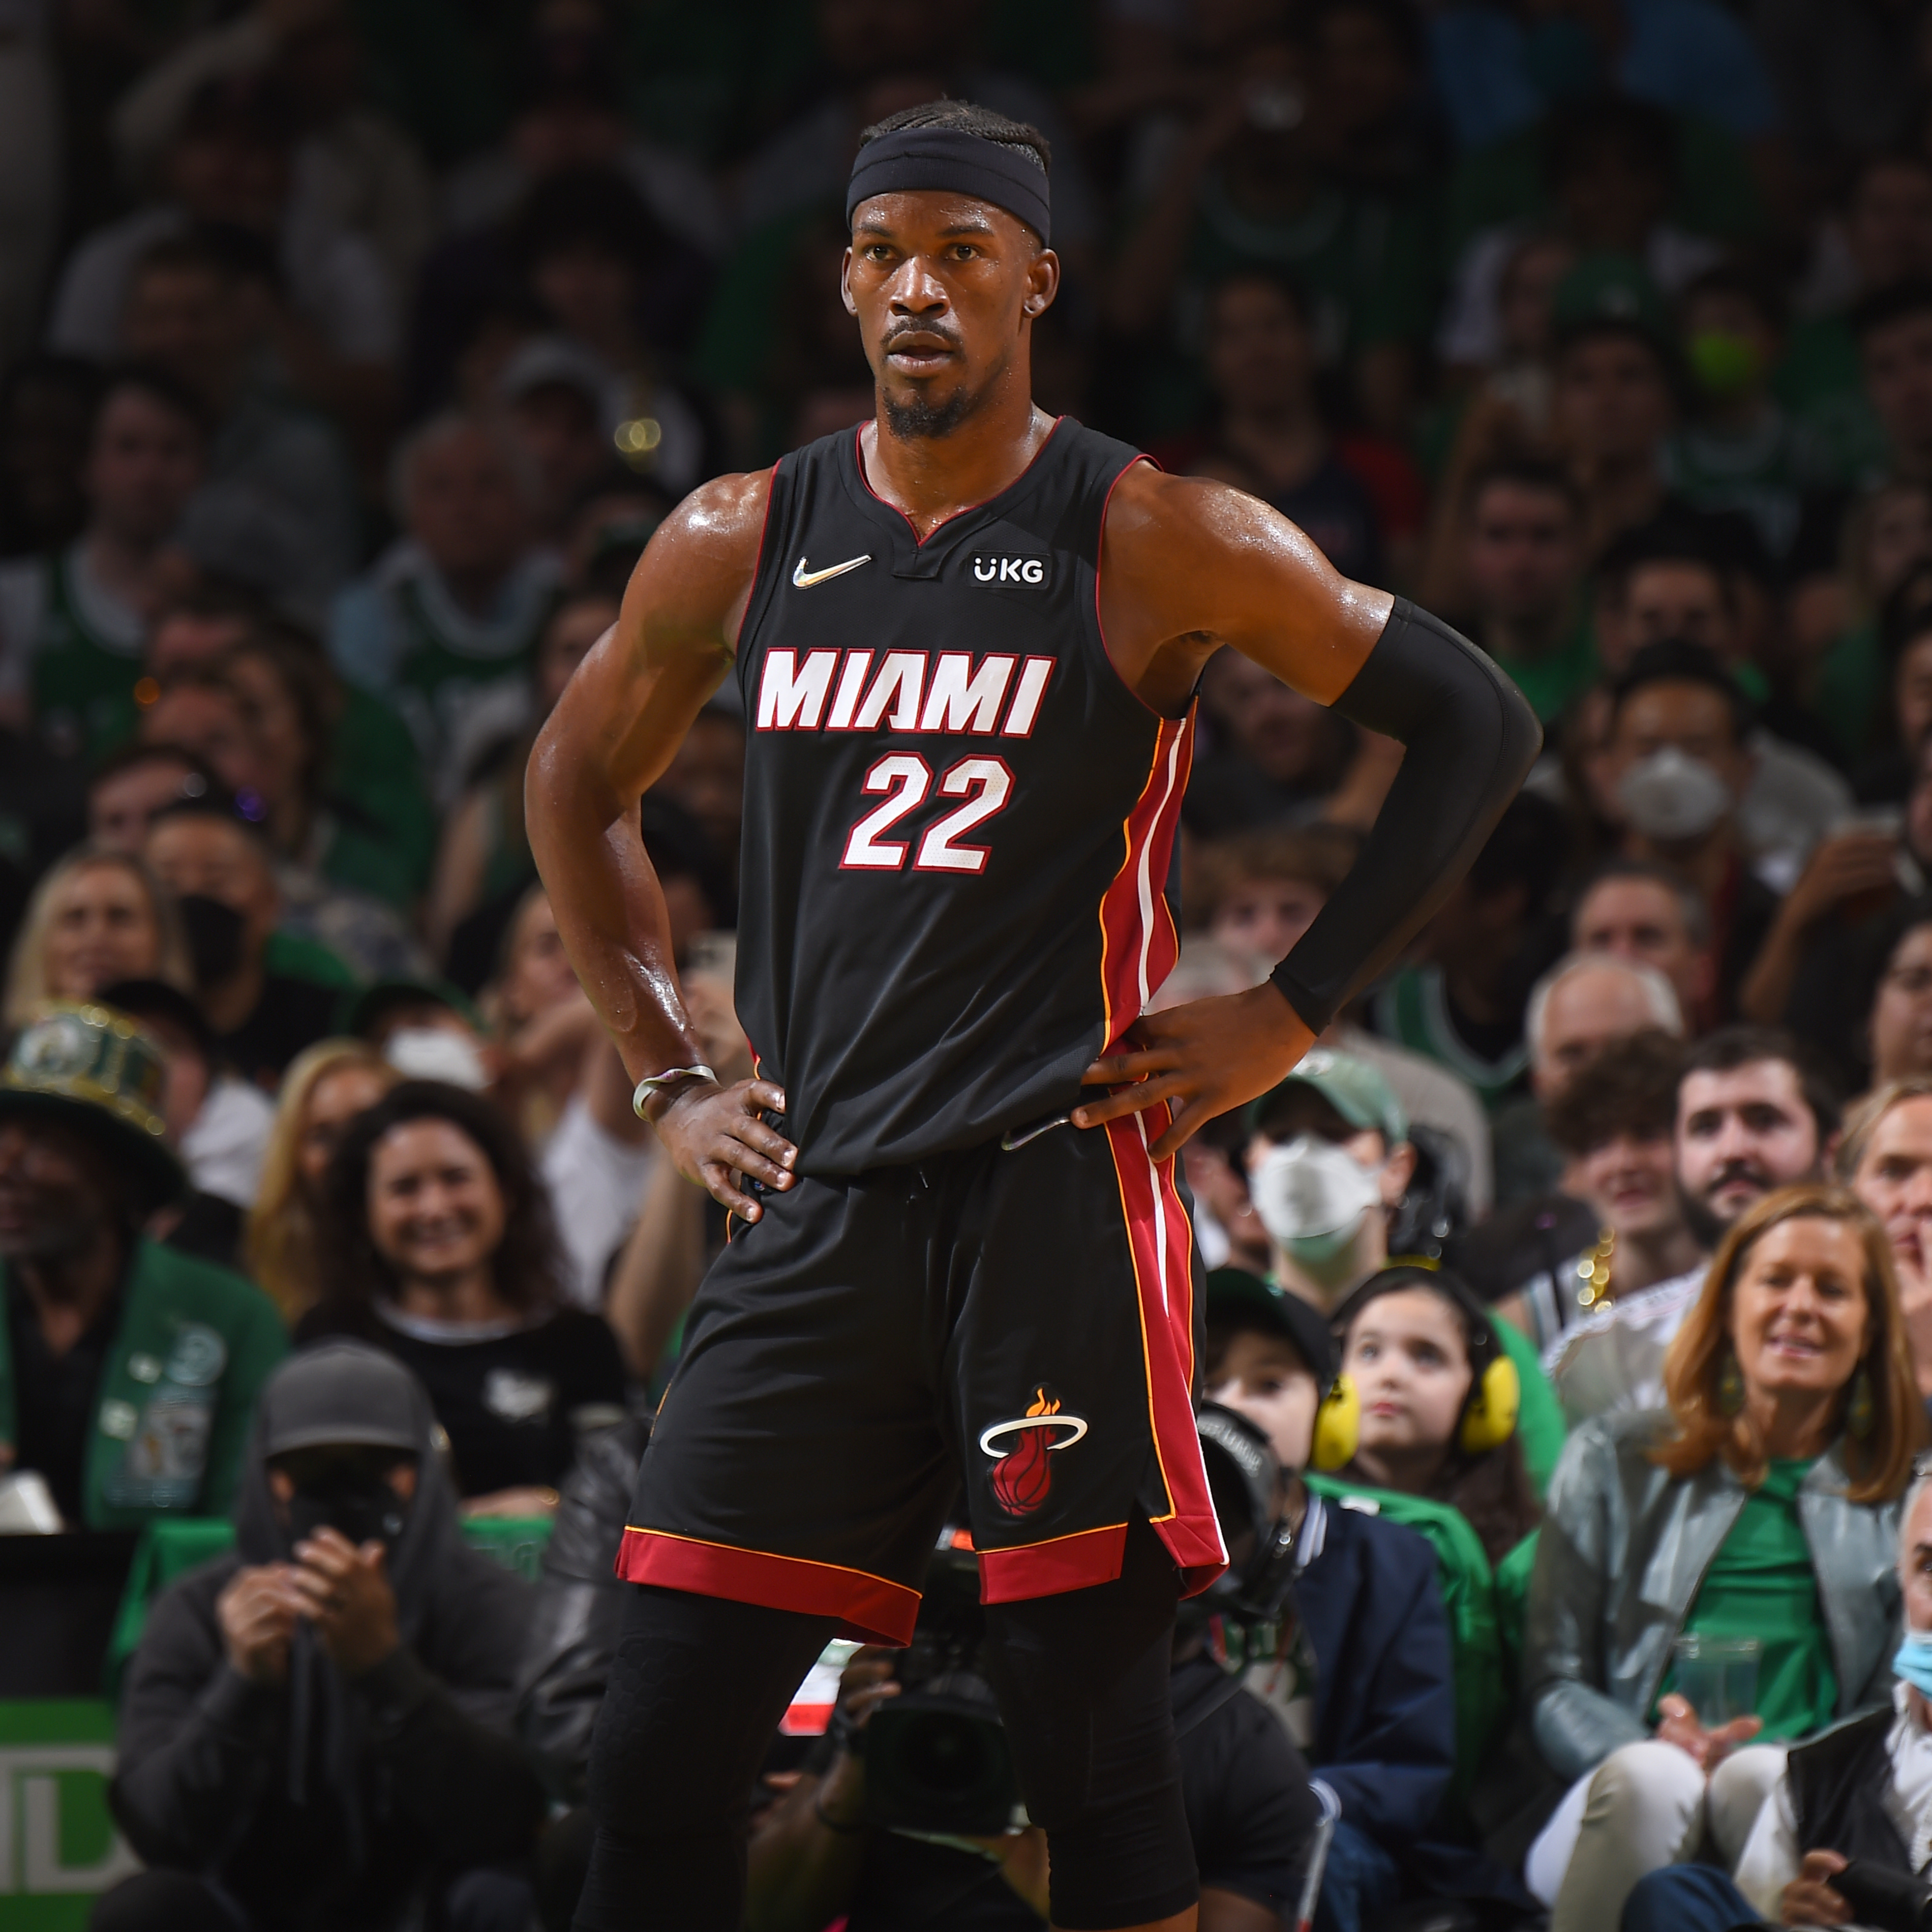 Report: Jimmy Butler Plans to Play for Heat in Game 4 vs. Celtics Despite Knee Injury